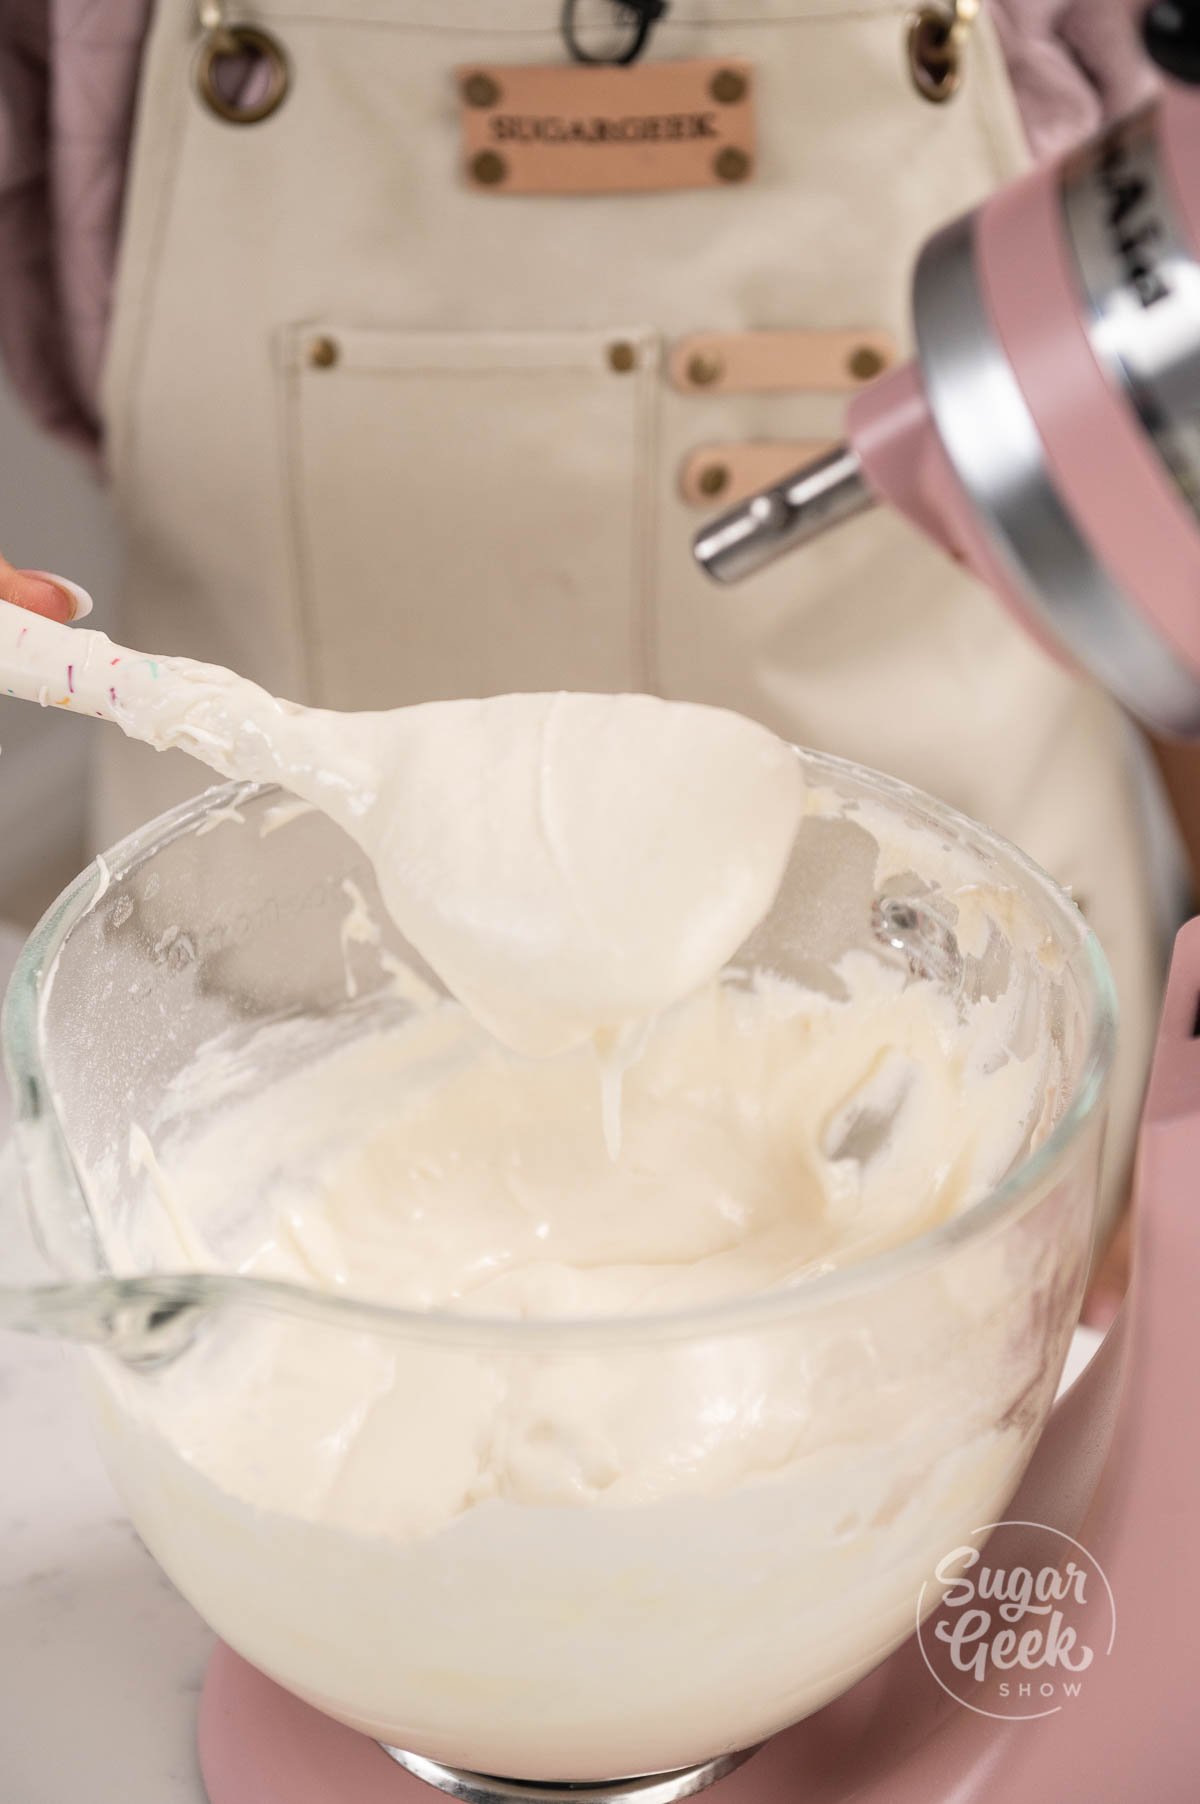 spatula being held above mixing bowl covered in cake batter.